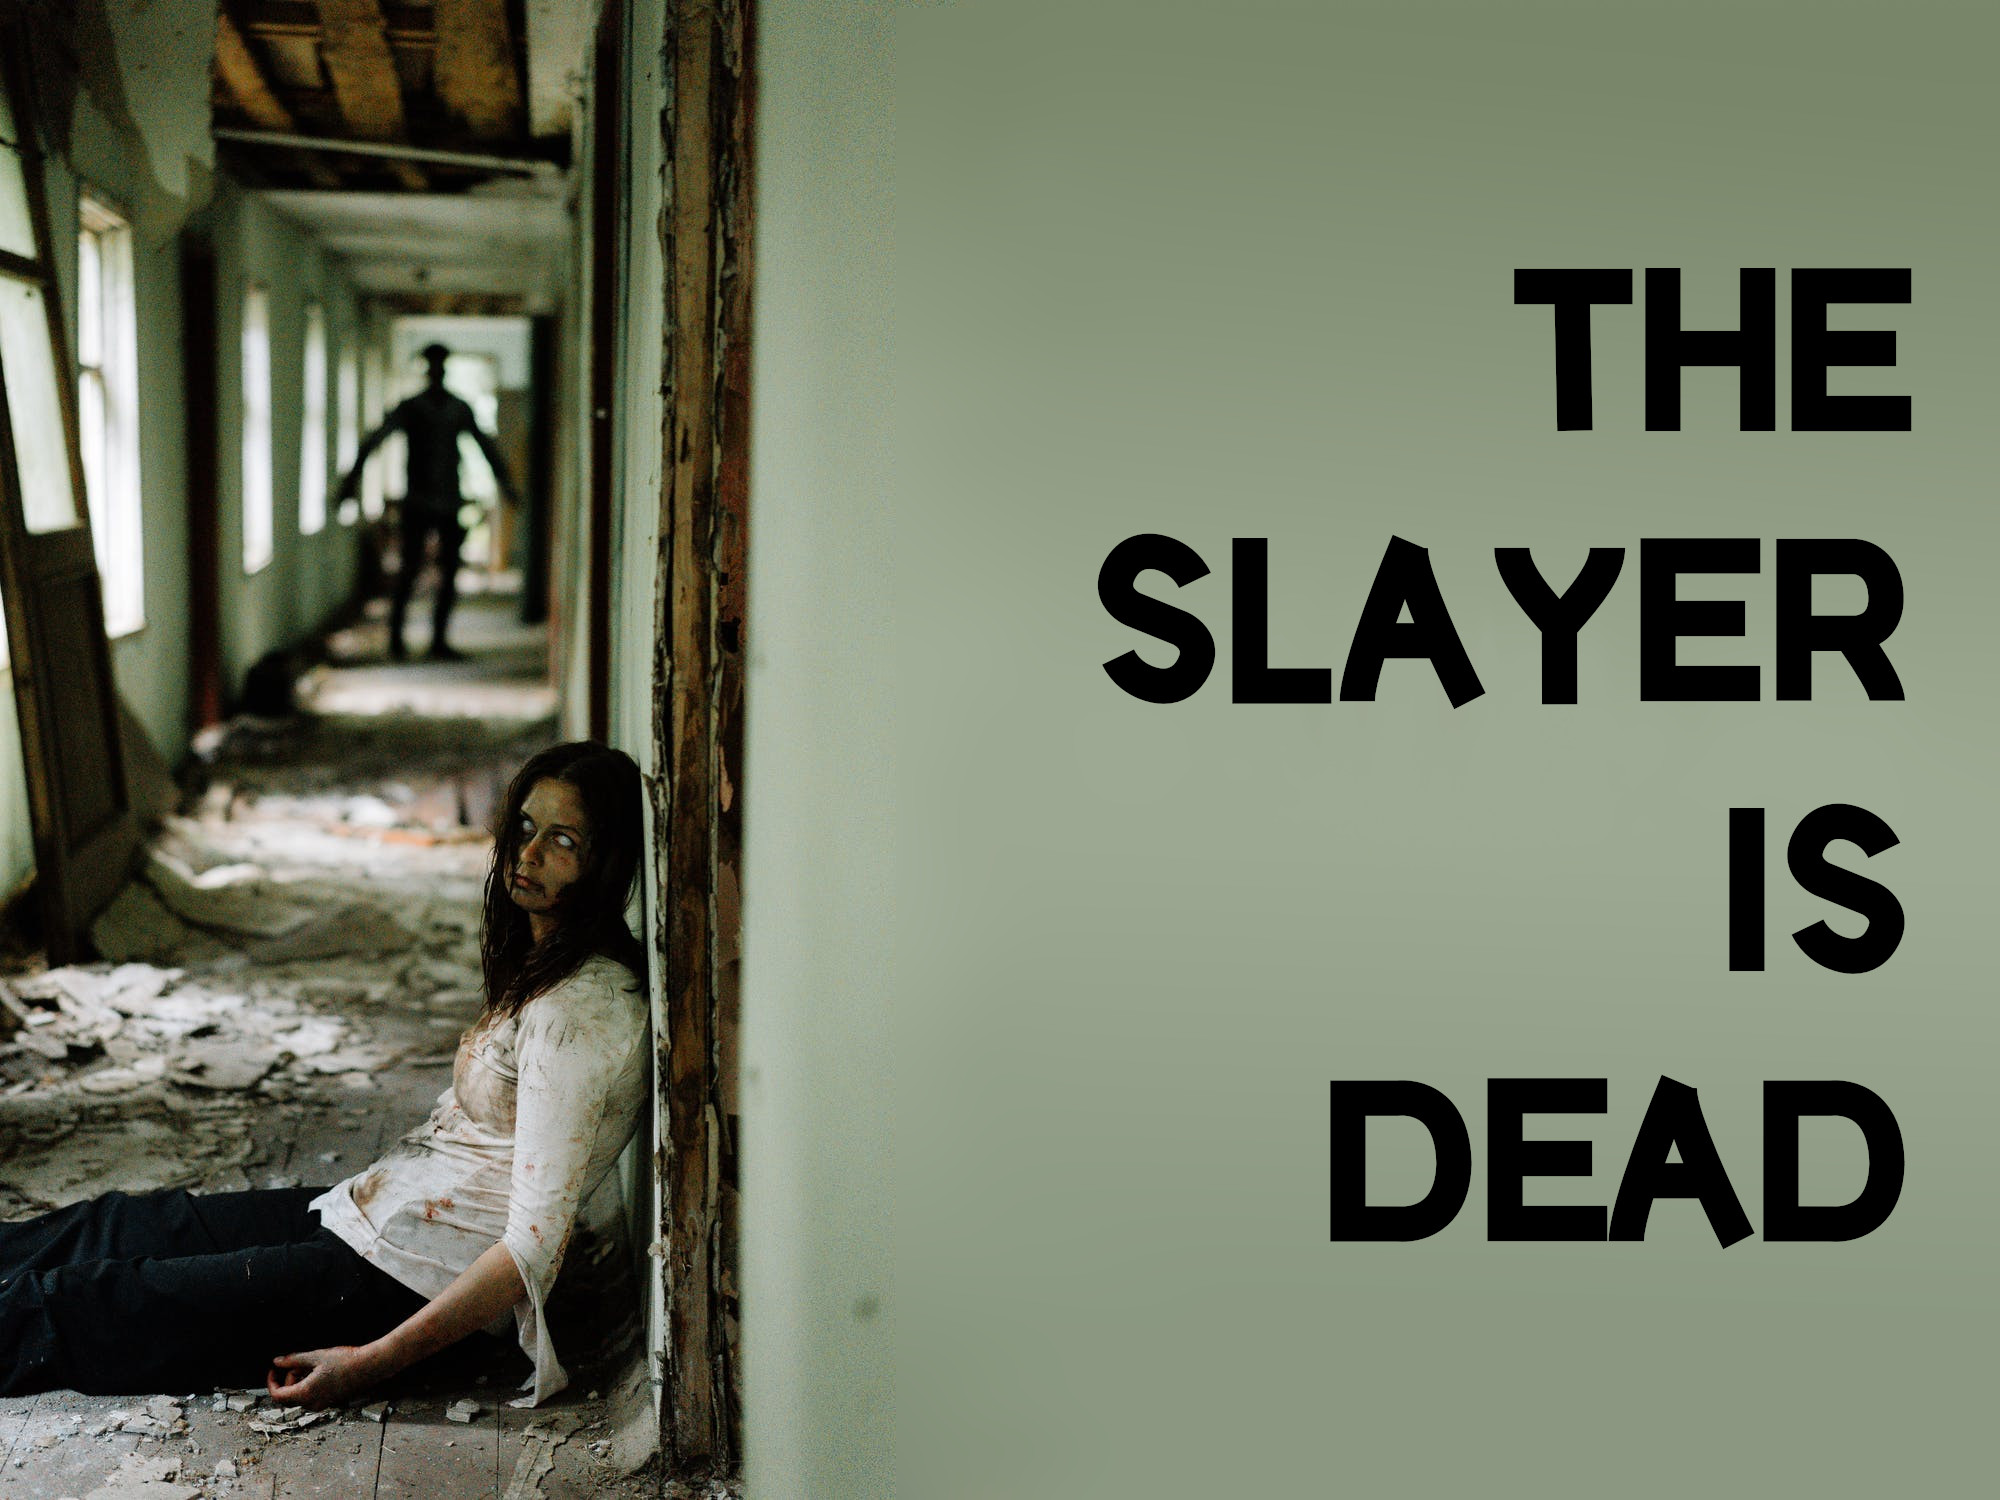 The Slayer is Dead